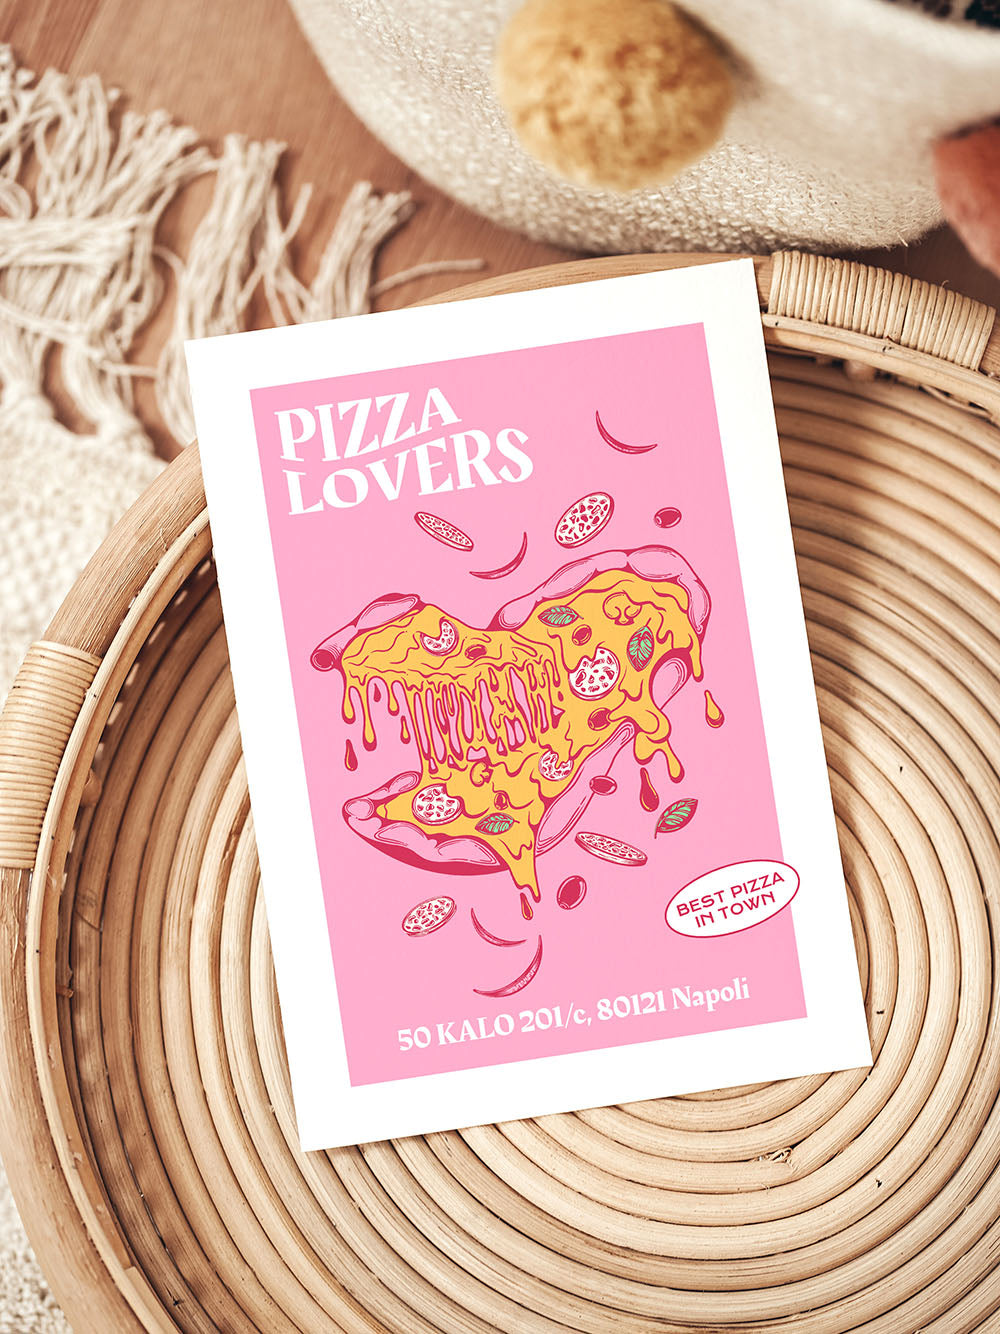 Affiche Pizza lovers